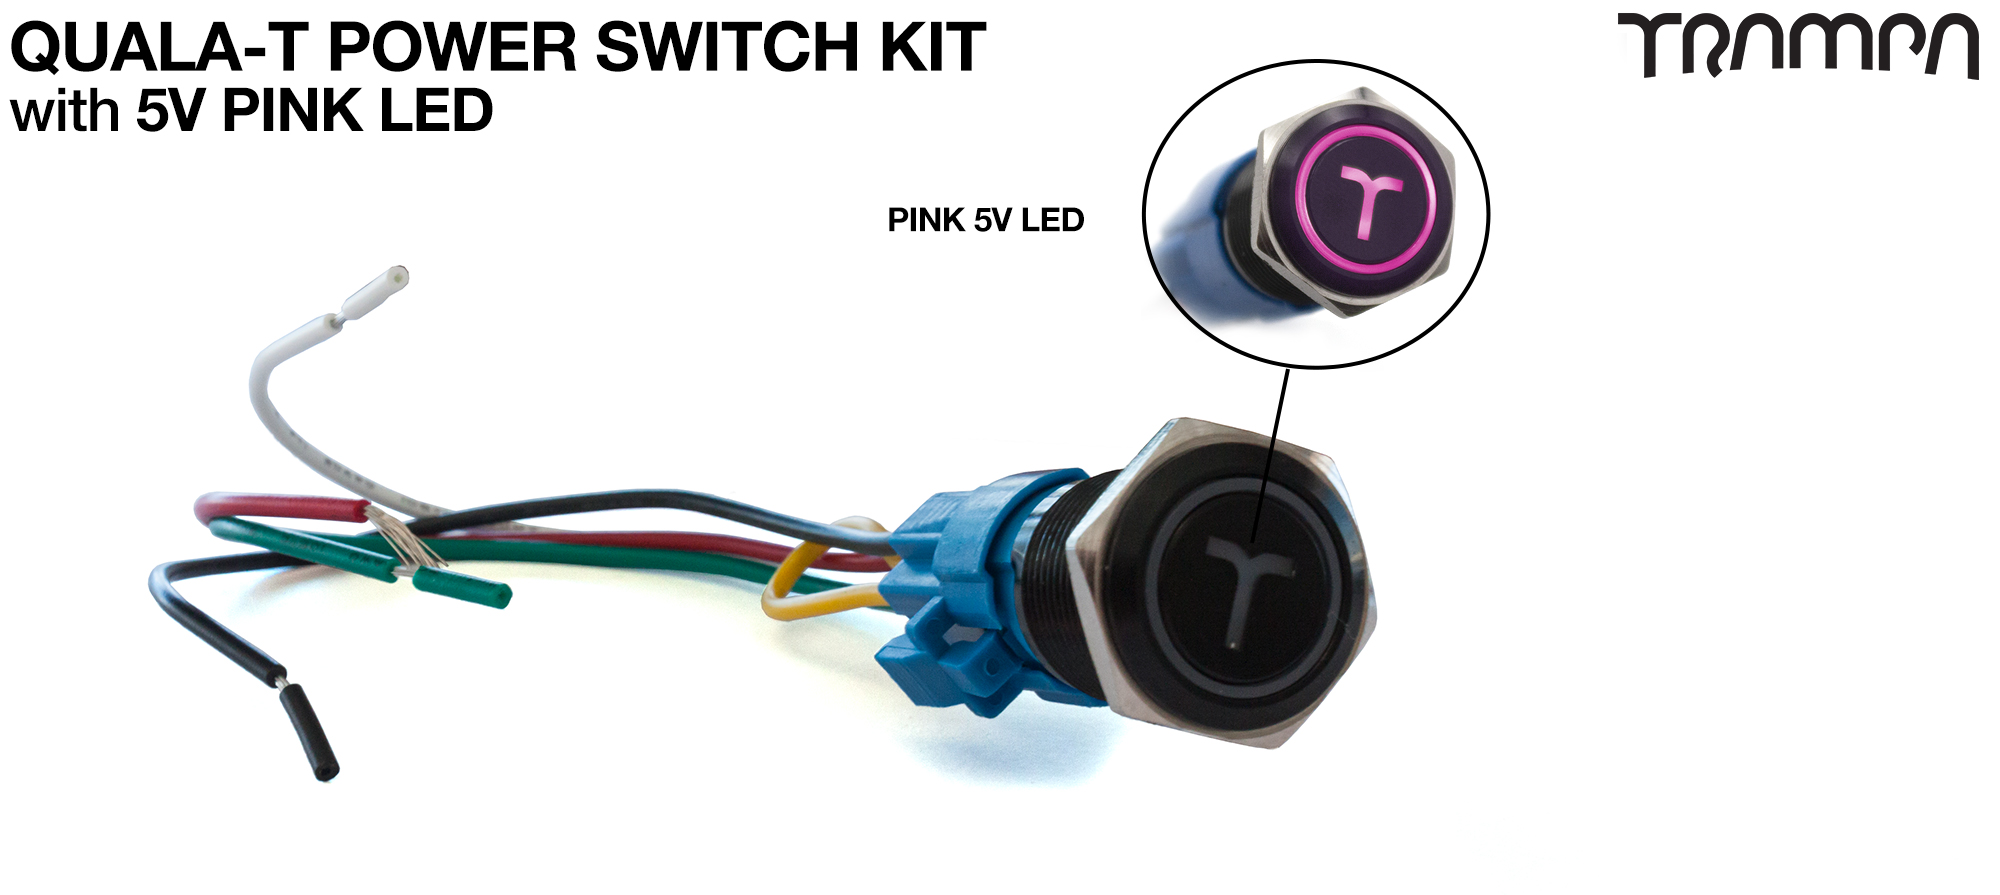 Yes please include a PINKY/PURPLE Power Switch (+£7.50)